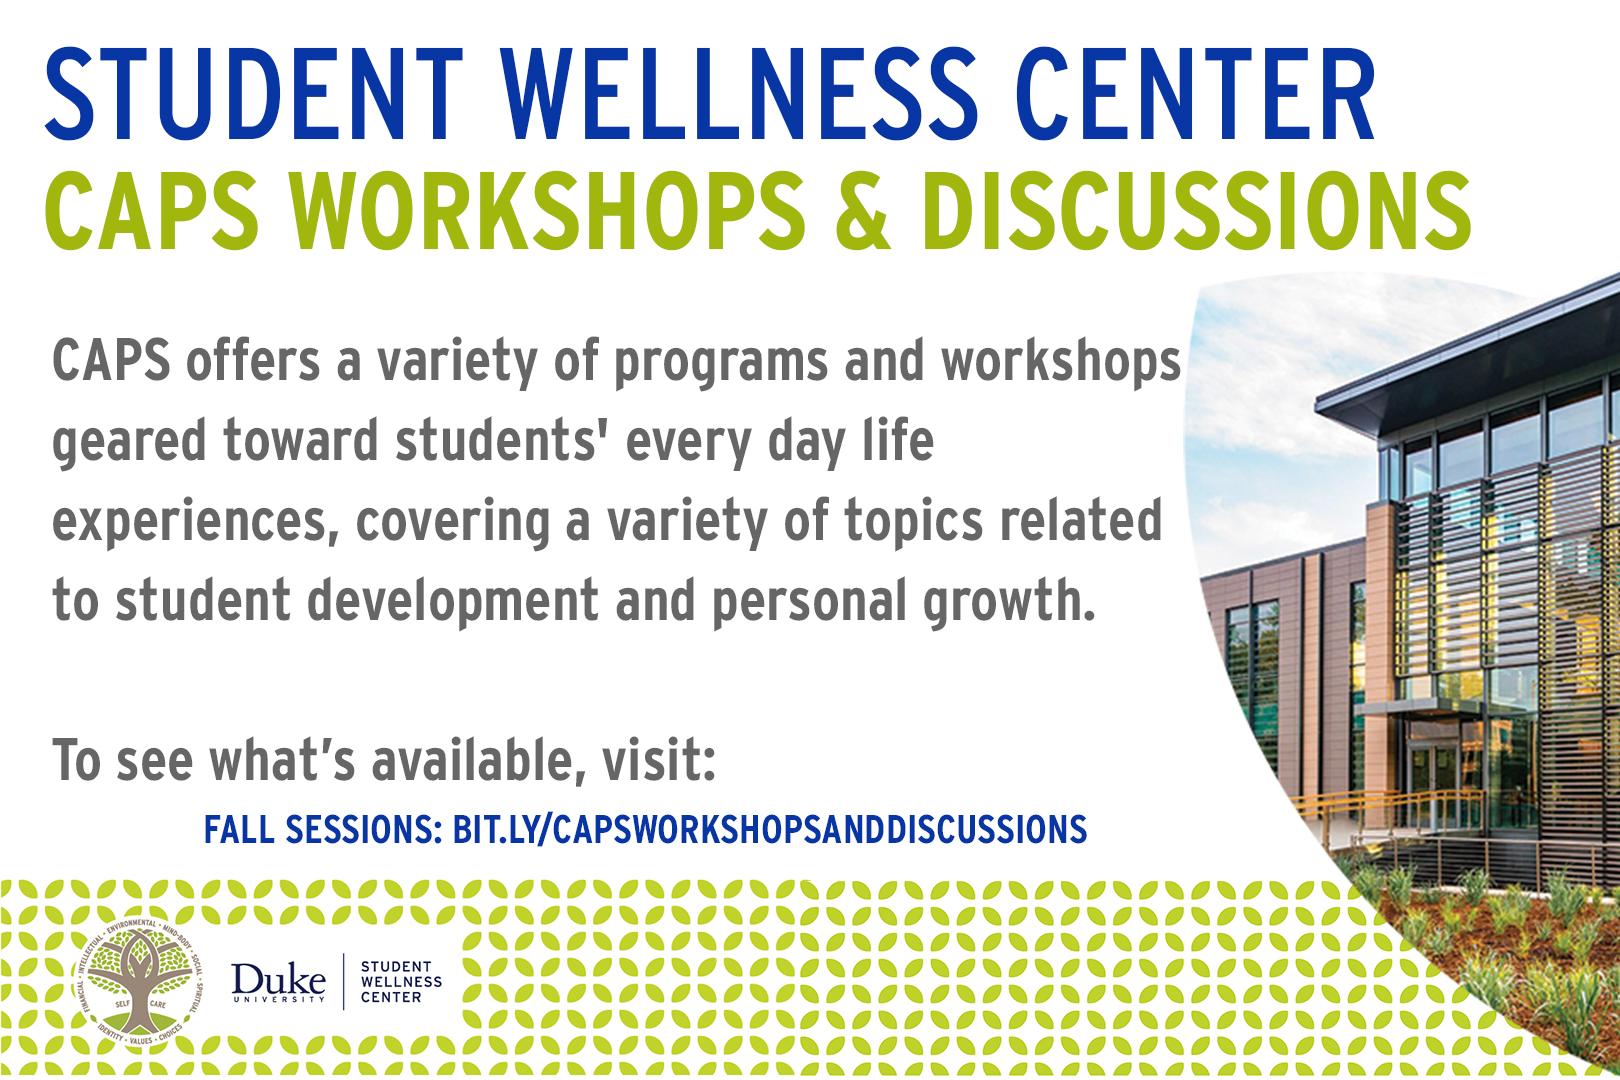 Flyer with information: Student Wellness Center (blue) CAPS Workshops and Discussions (green) CAPS offers a variety of programs and workshops geared toward students&amp;#39; every day life experiences, covering a variety of topics related to student development and personal growth. To see what&amp;#39;s available visit: fall sessions: bit.ly/capsworkshopsanddiscussions (Photo of student wellness center)